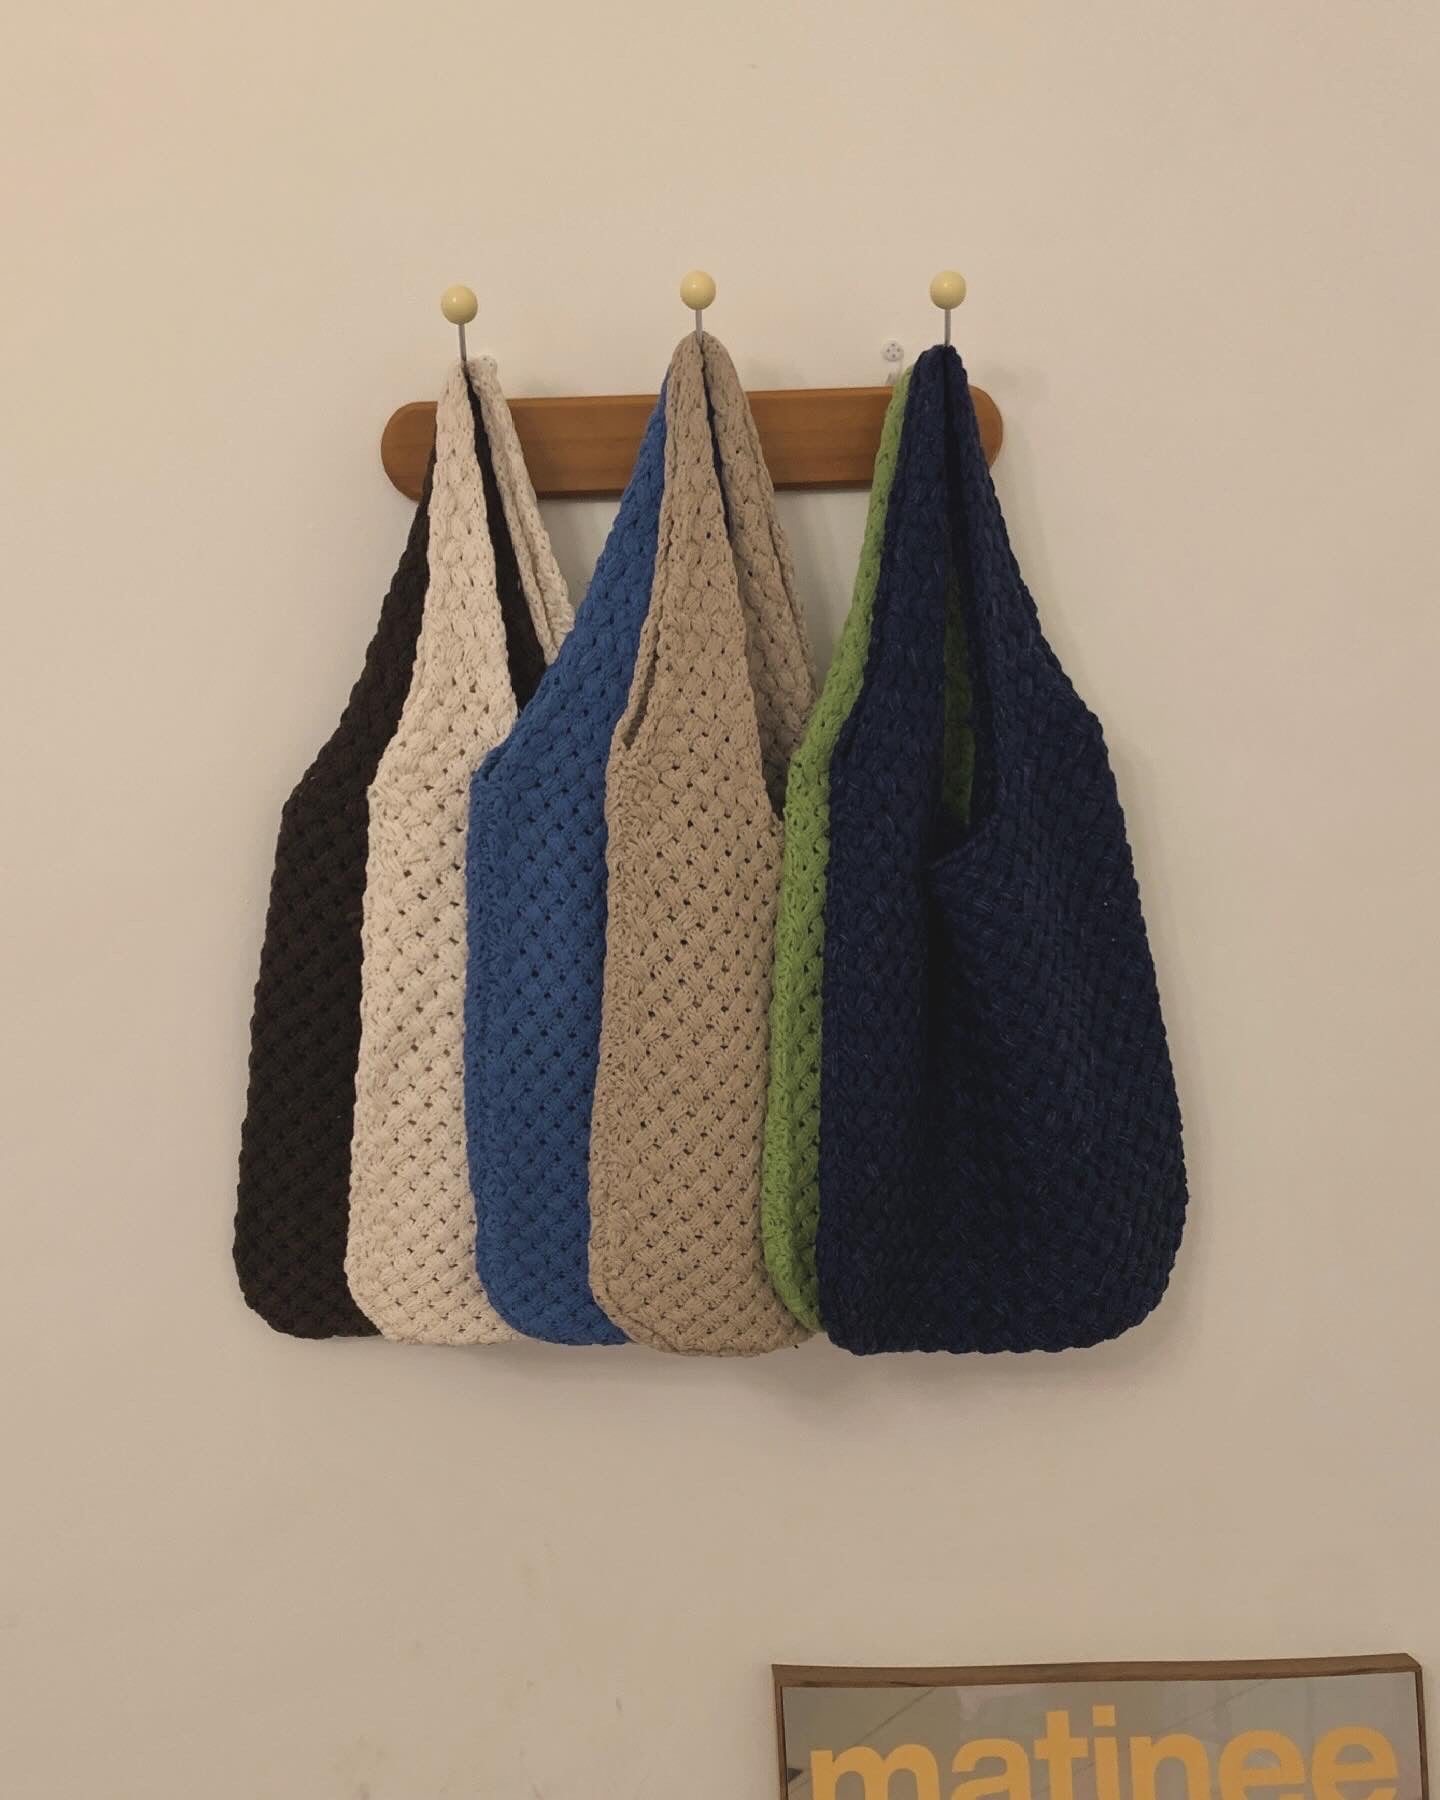 Hollow Haven Knit Tote